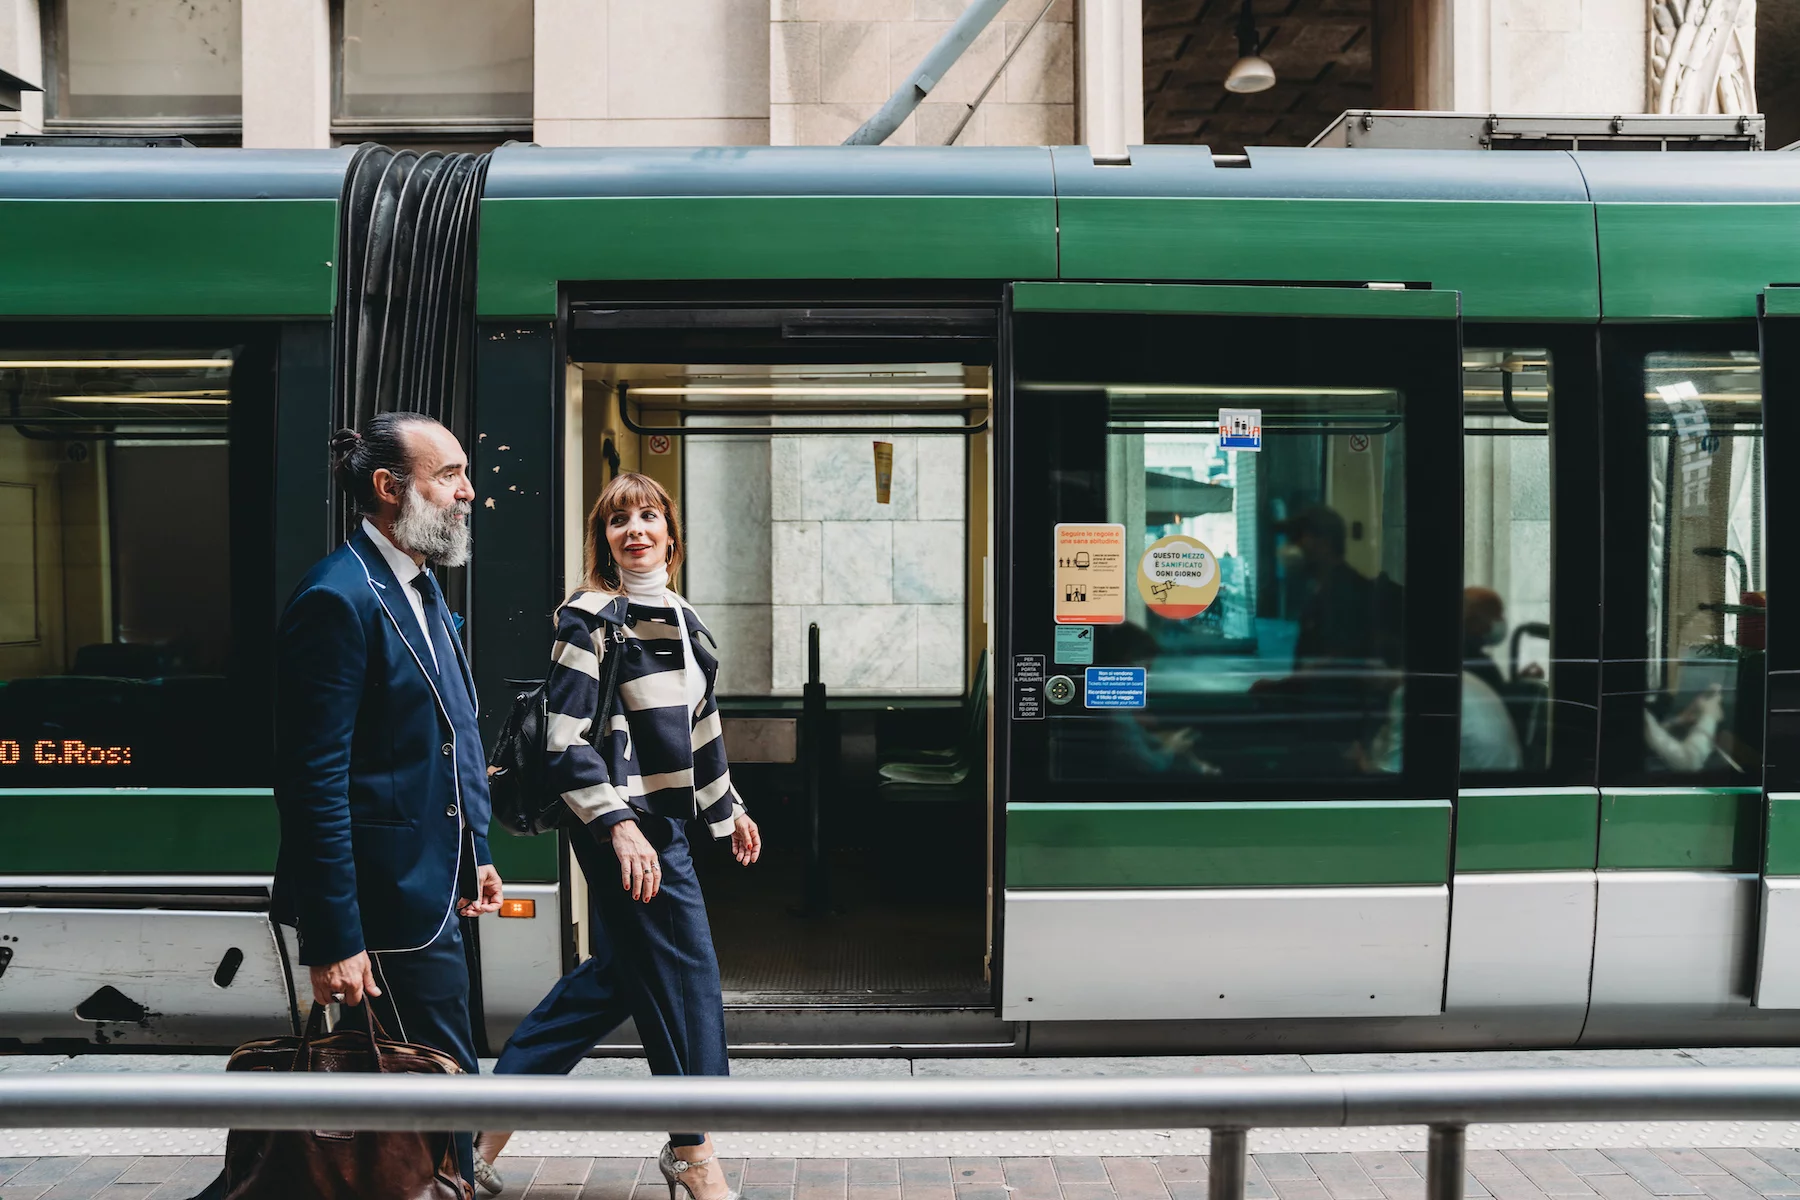 A smartly dressed man and woman walk alongside a green tram in Milan on their way to work